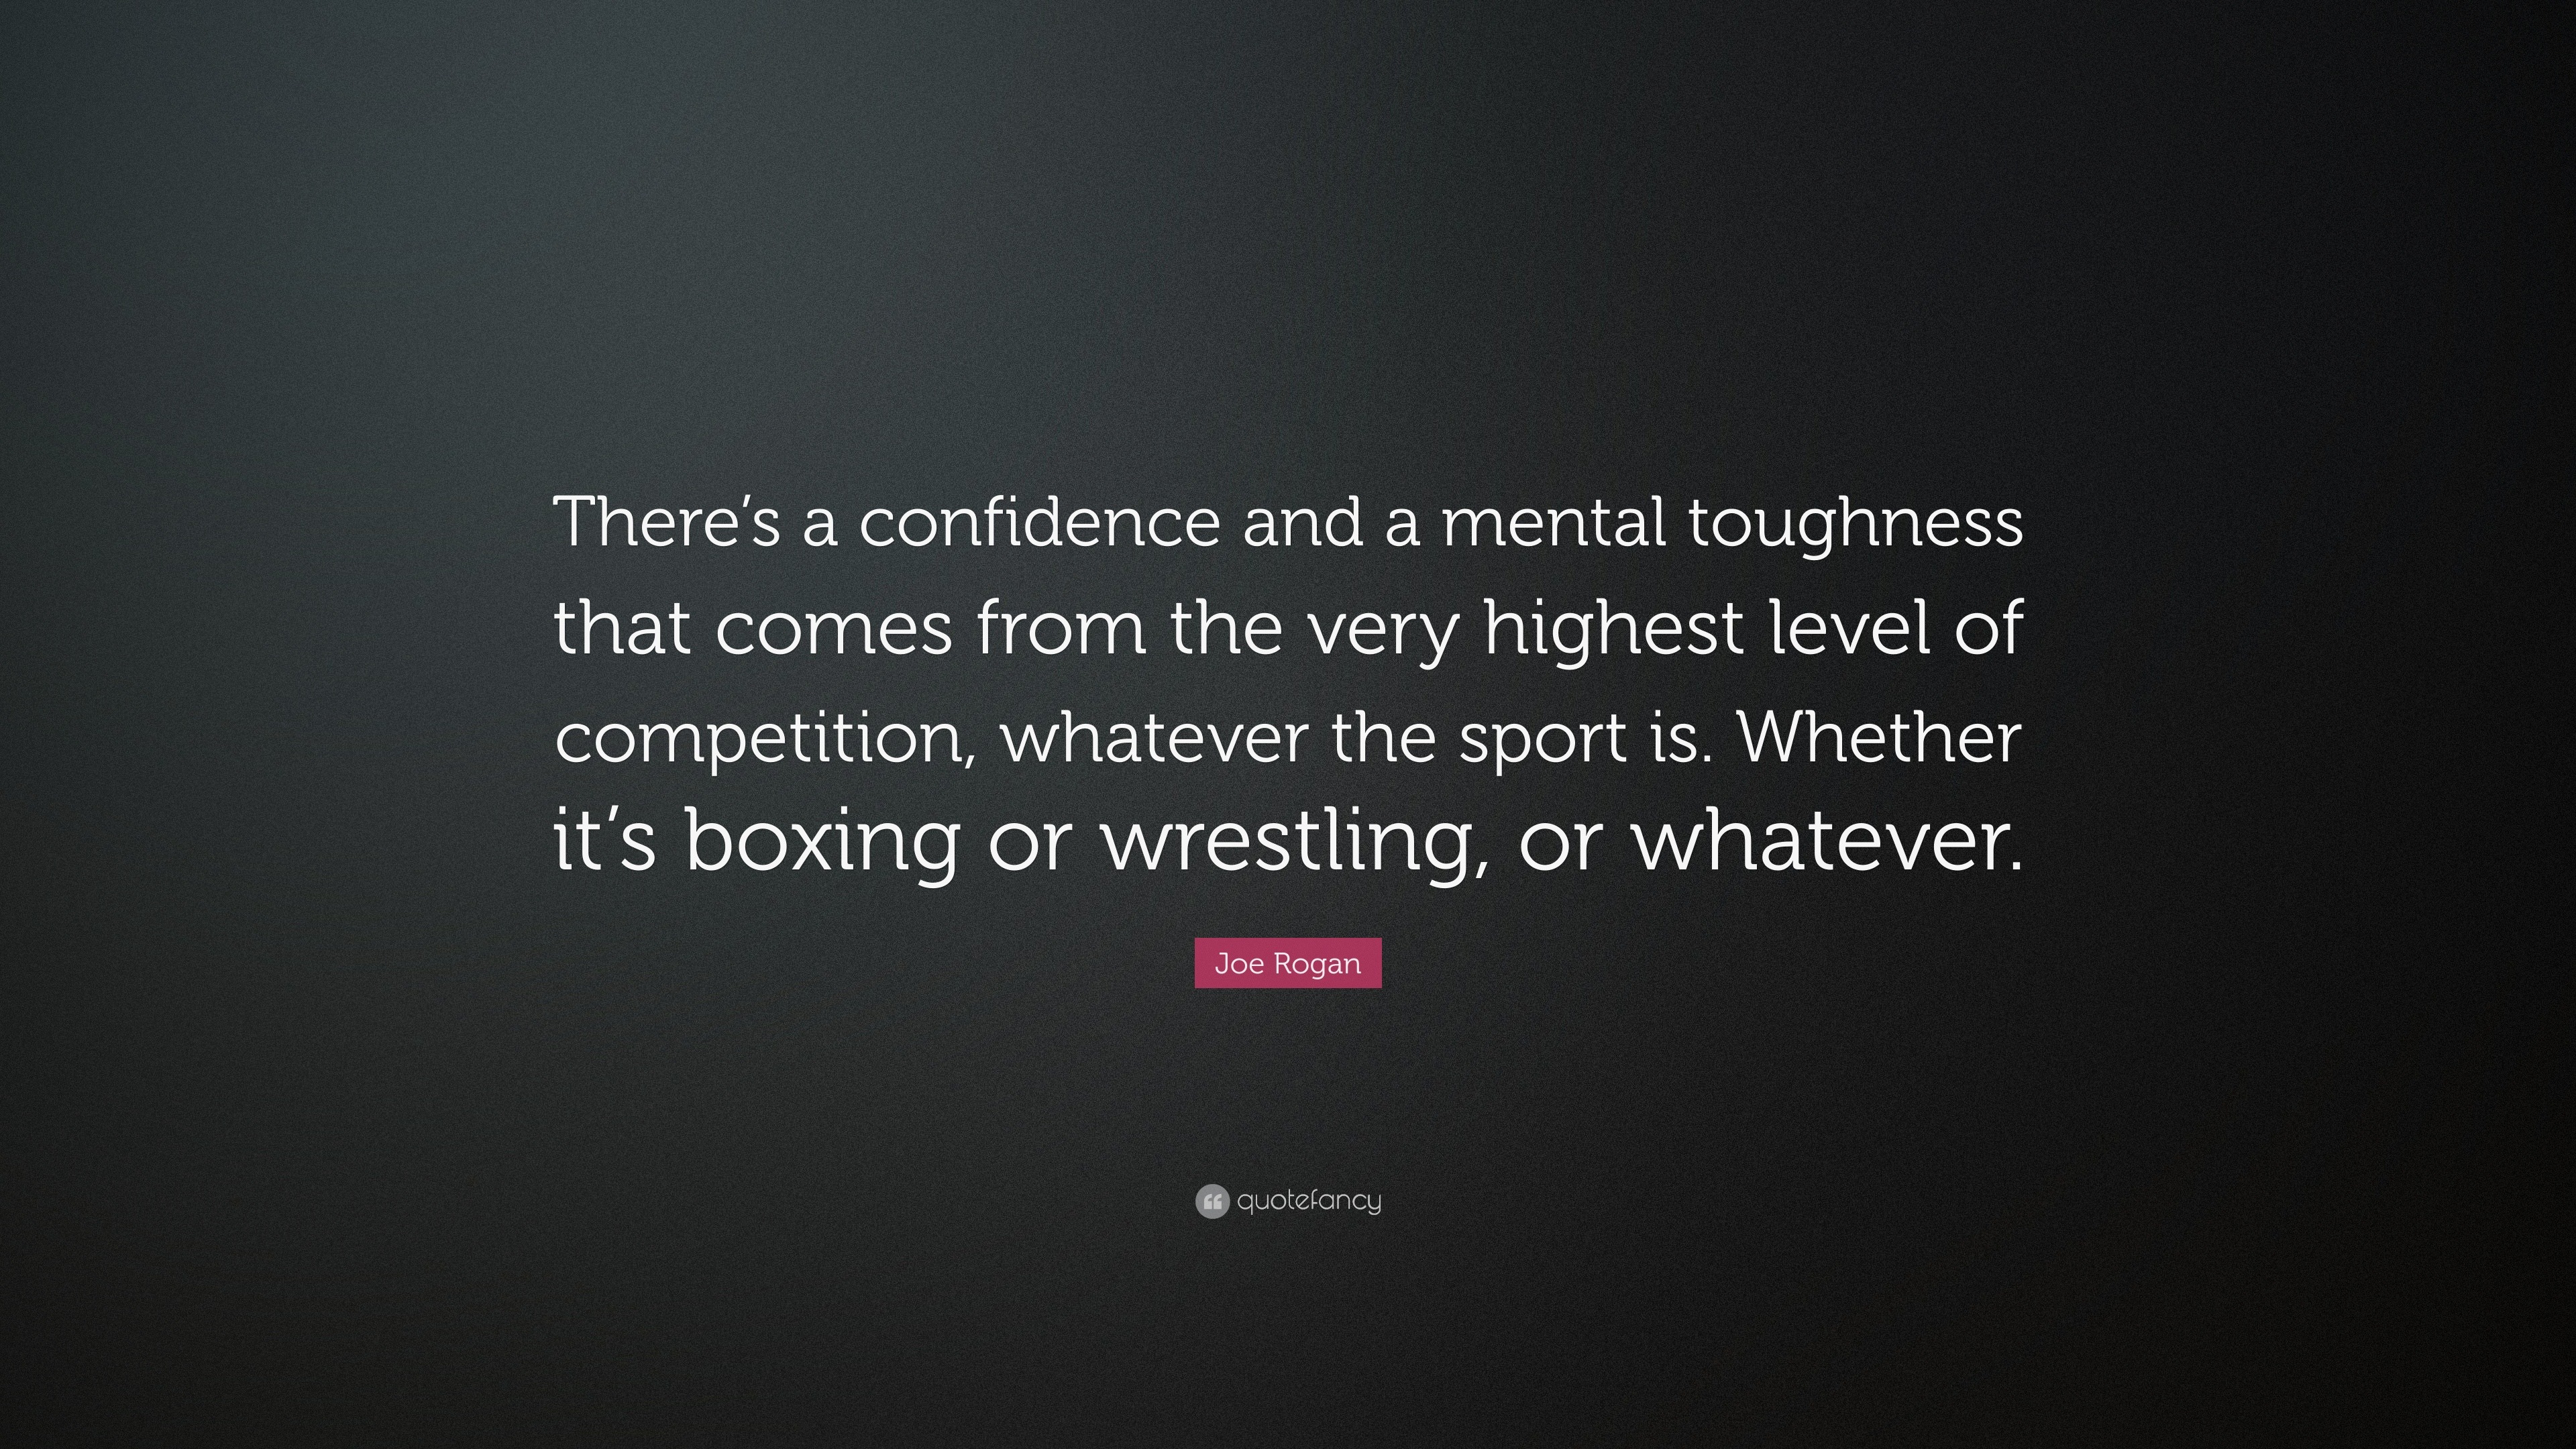 Joe Rogan Quote: “There's A Confidence And A Mental Toughness That Comes From The Very Highest Level Of Competition, Whatever The Sport Is...”